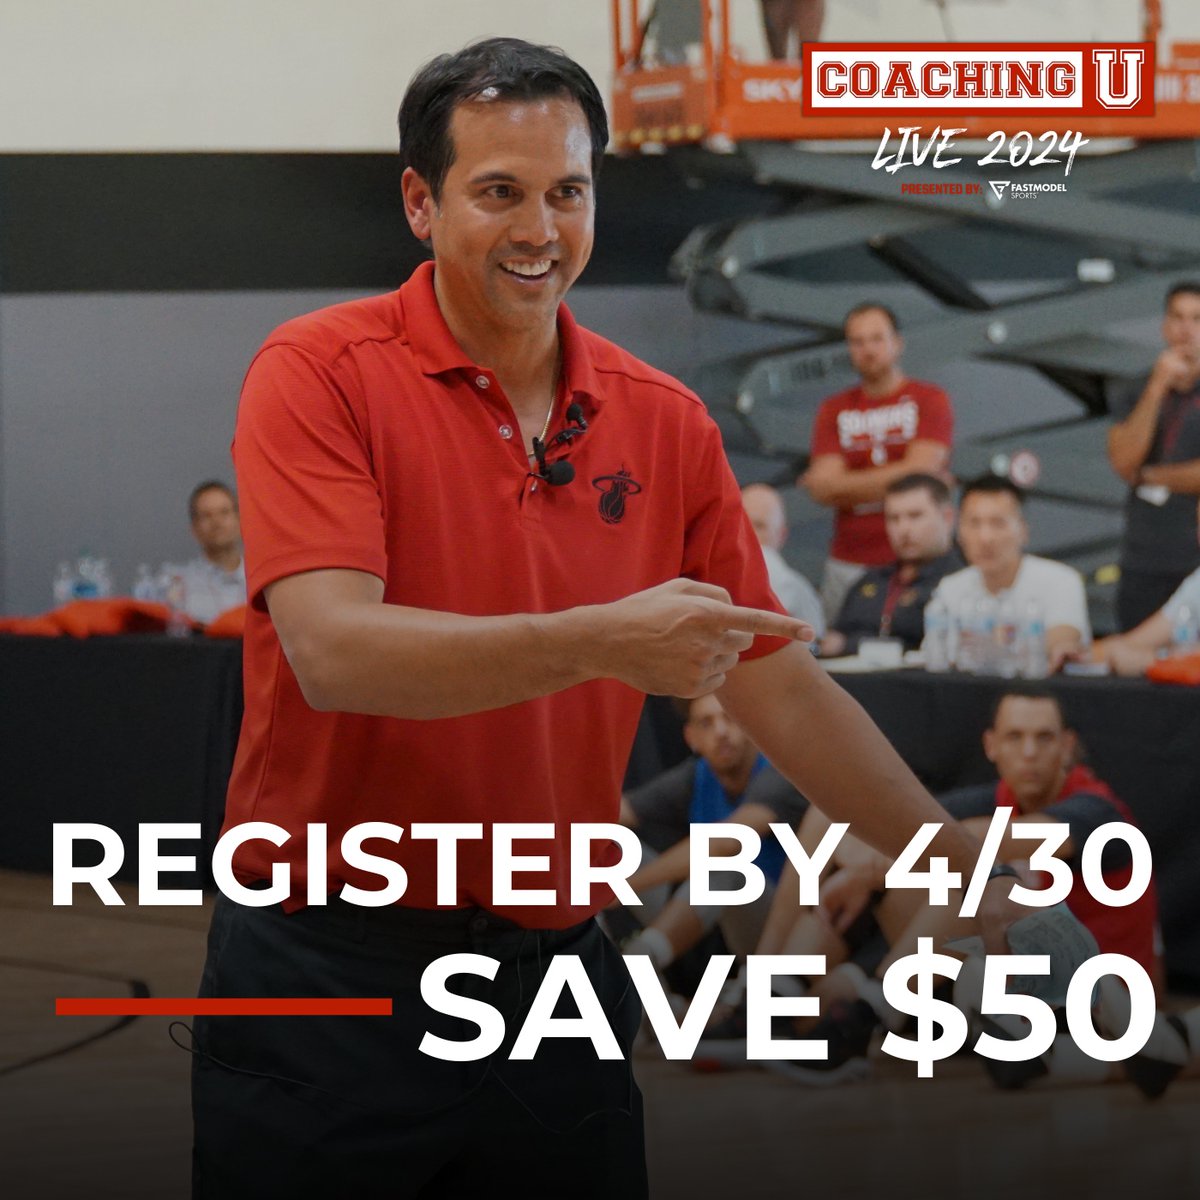 🚨 LAST DAY TO SAVE!!! 🚨 🏀 Register by TONIGHT and receive $50 OFF your general admission ticket to Coaching U Live 2024 pres. by @fastmodelsports 🎟️ Save your seat TODAY! 🔗 coachingulive.com/2024